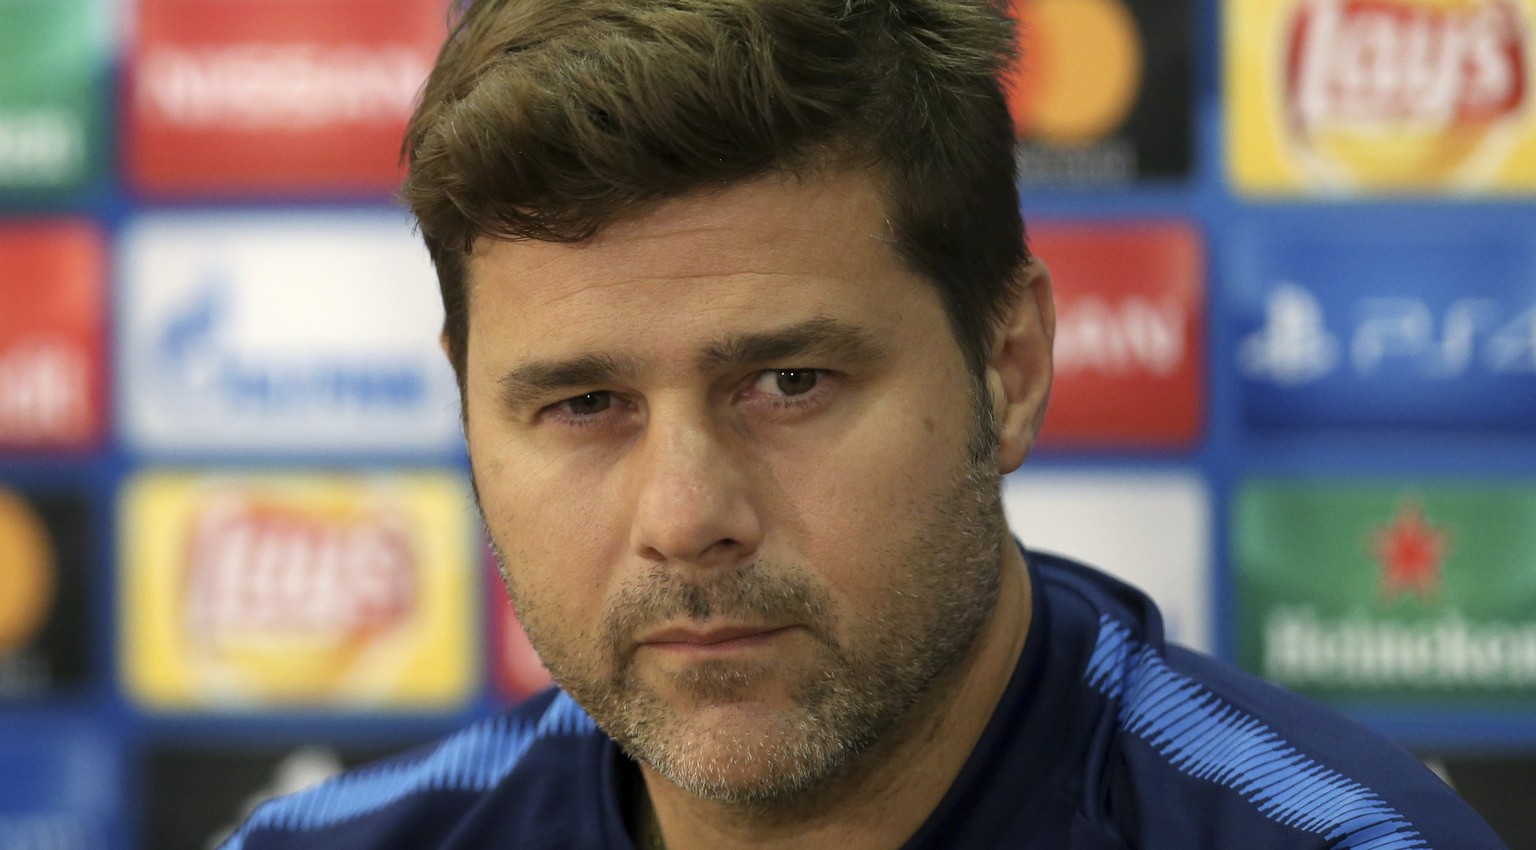 Tottenham Hotspur manager Mauricio Pochettino talks to the media during a press conference before a training session at GSP stadium, in Nicosia, Cyprus, on Monday, Sept. 25, 2017. Tottenham Hotspur wi ...